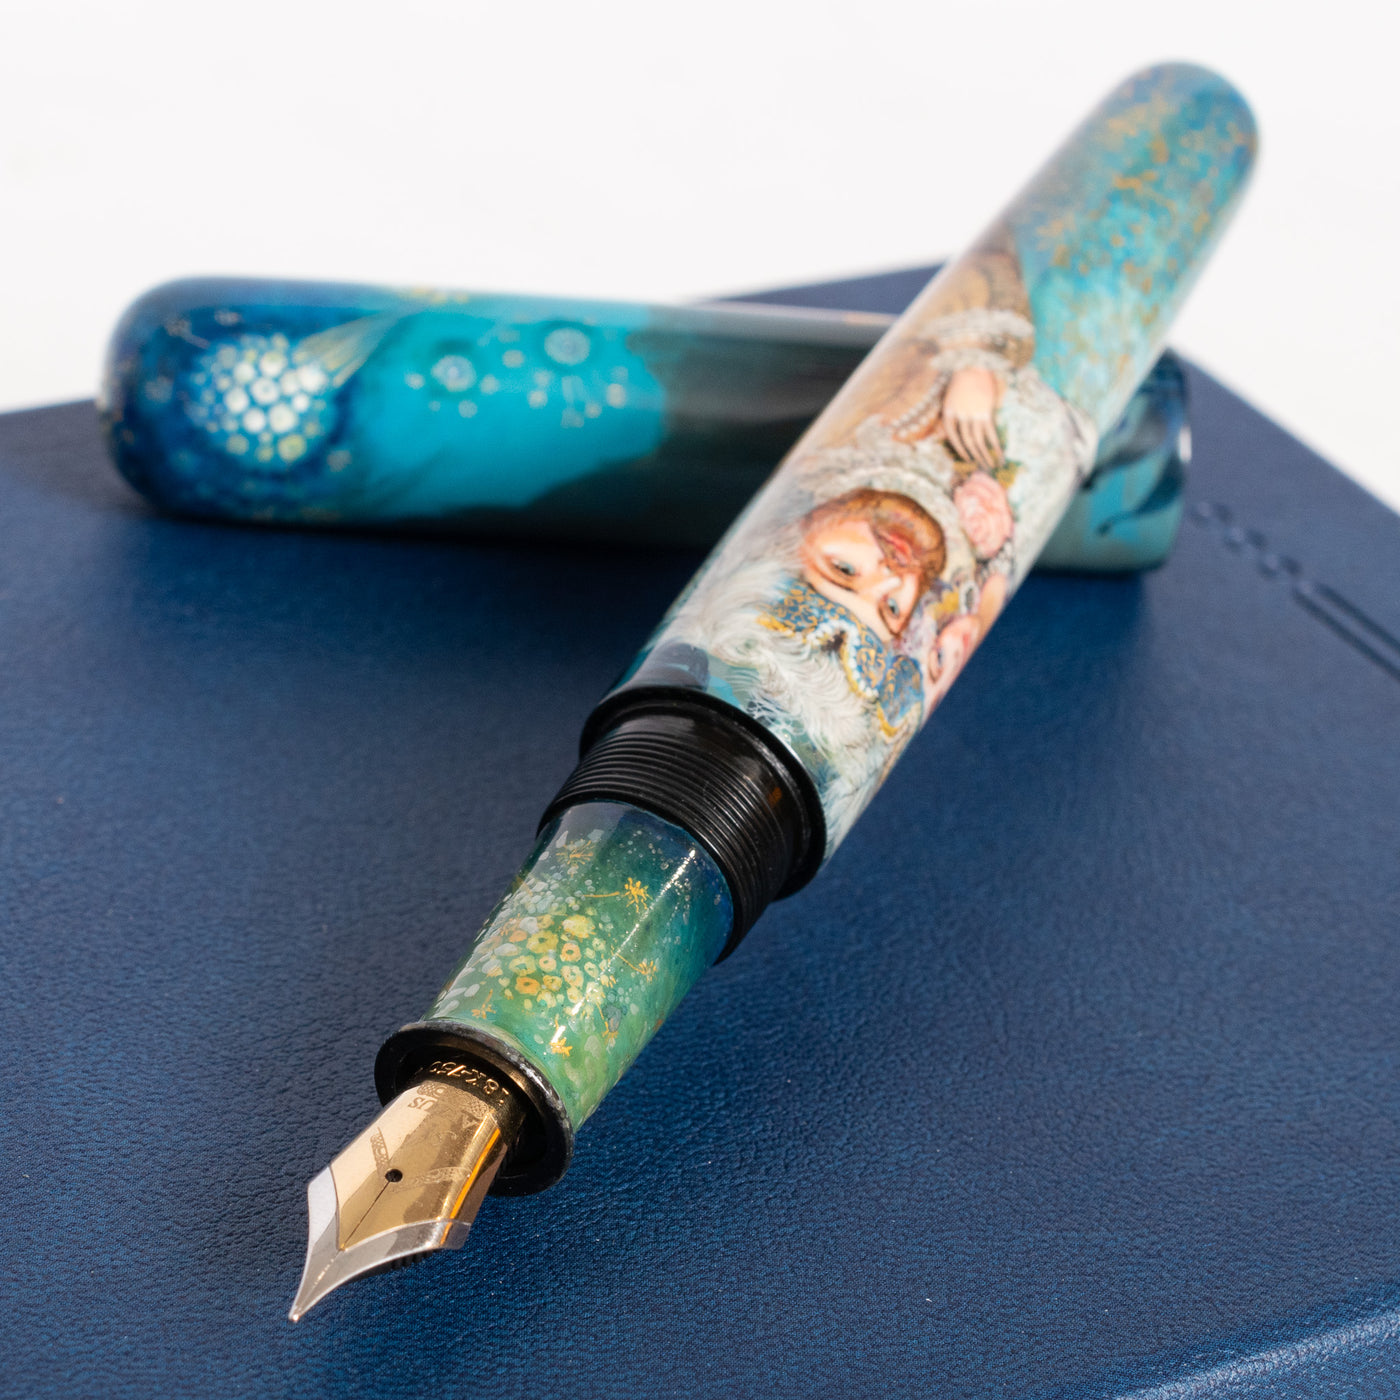 Artus Great Cities of the World Venice Fountain Pen Uncapped